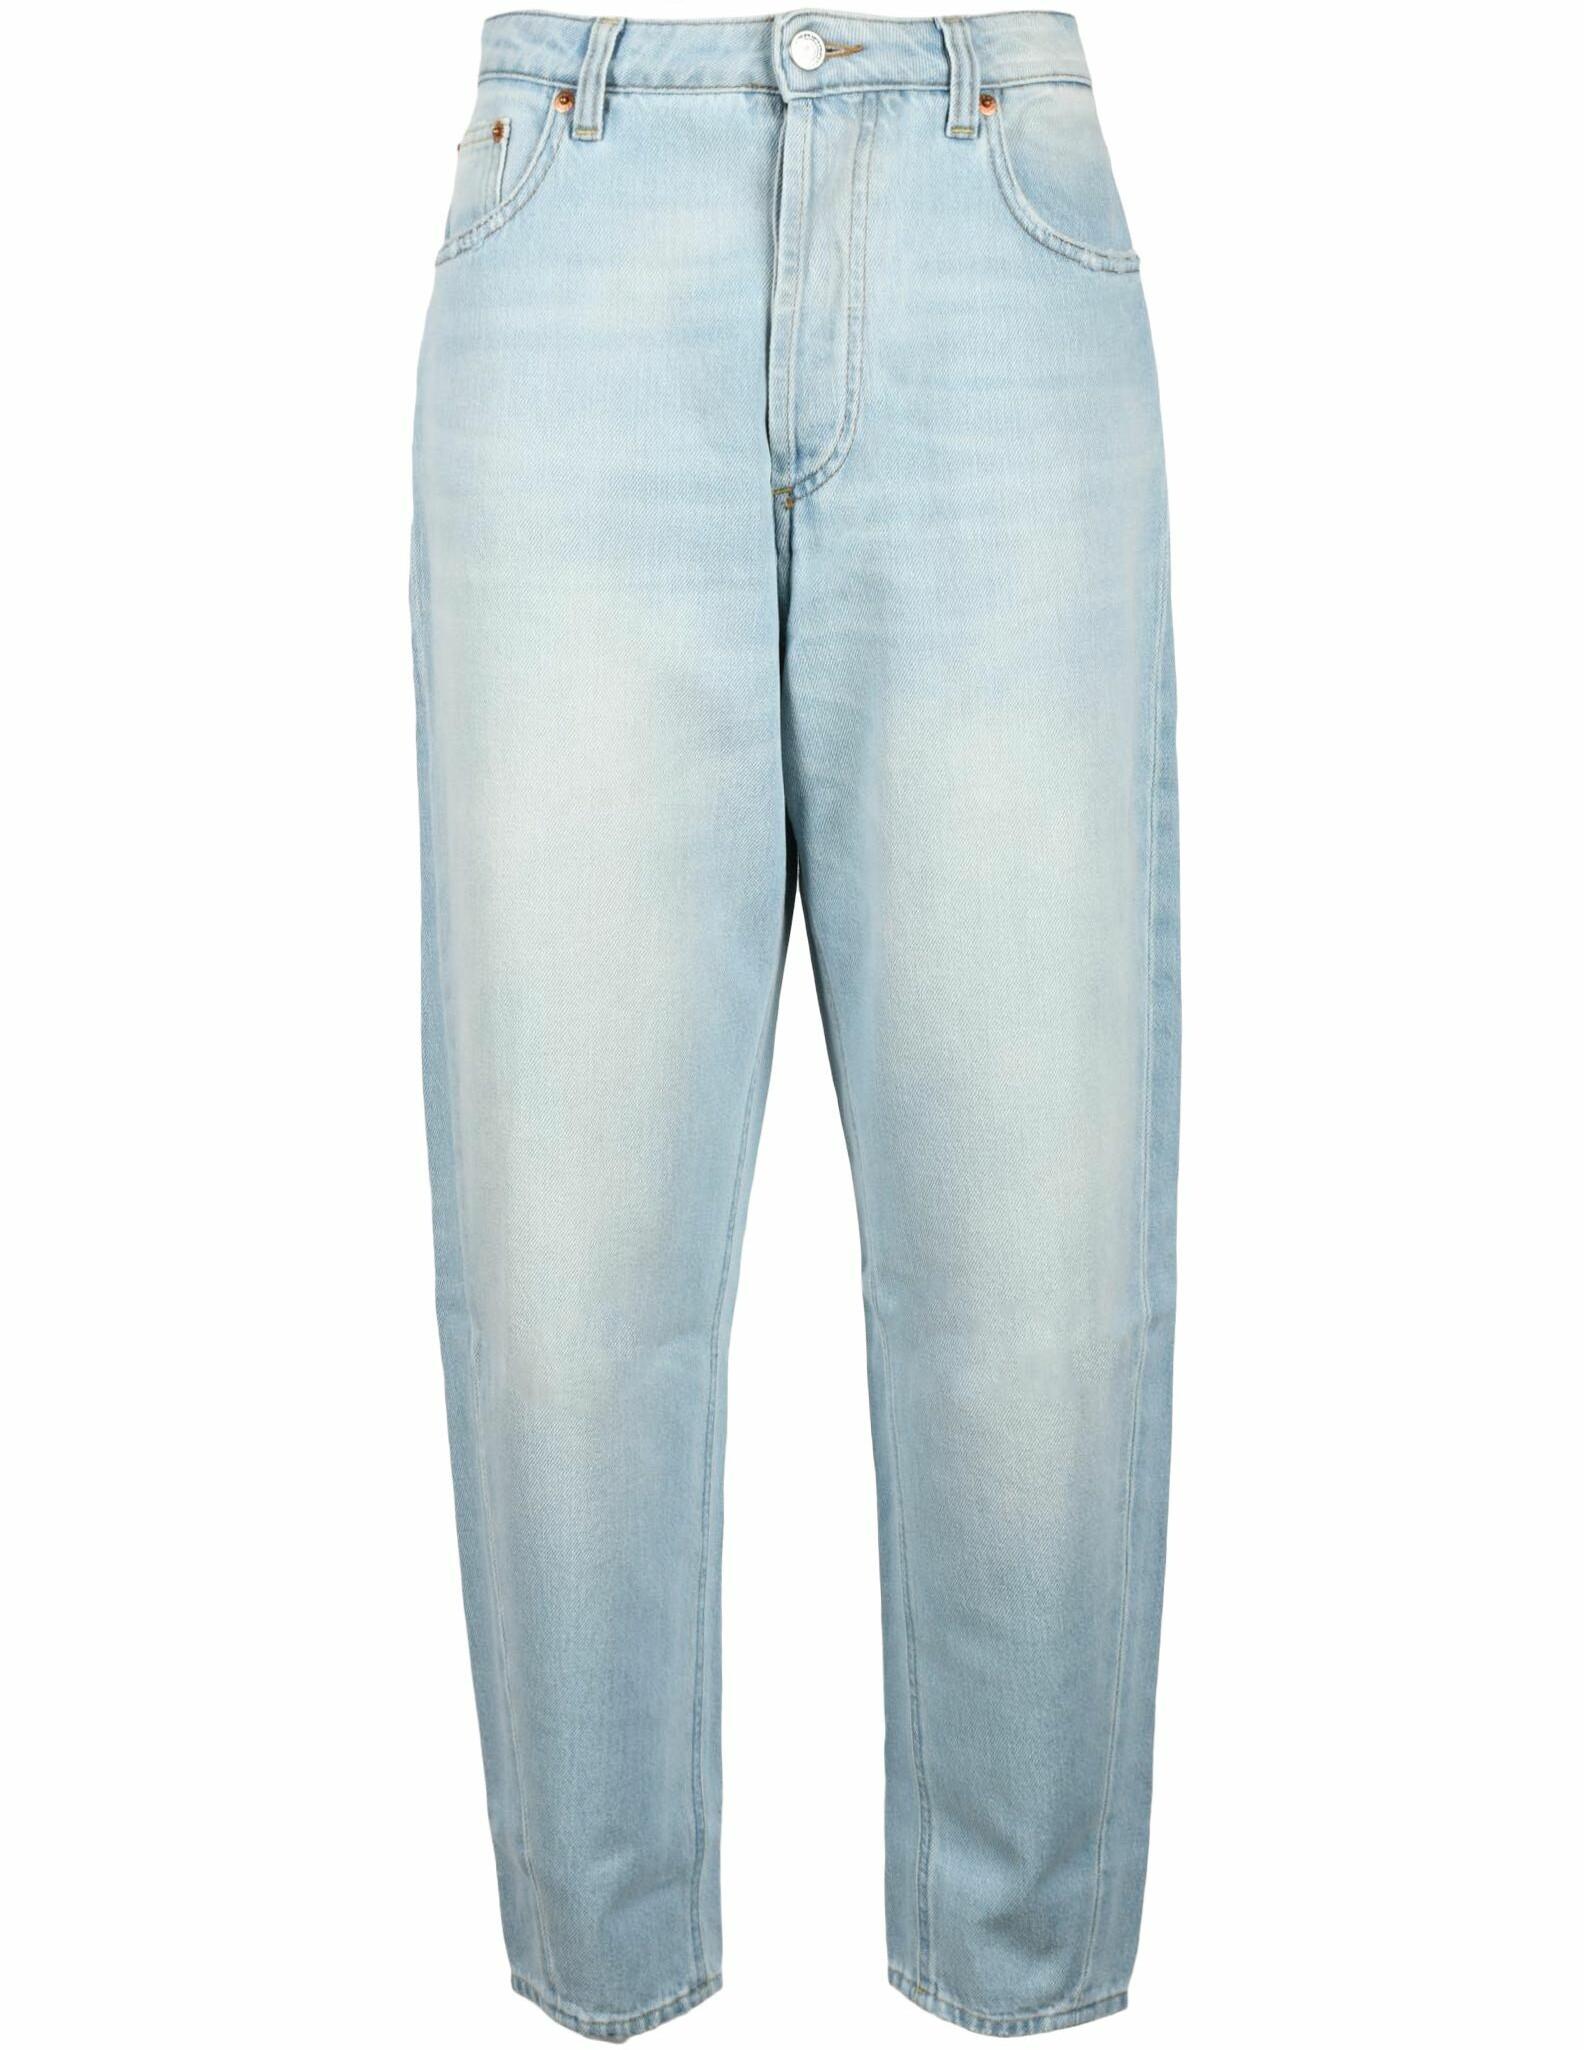 Department 5 Women's Sky Blue Jeans 31 IT at FORZIERI